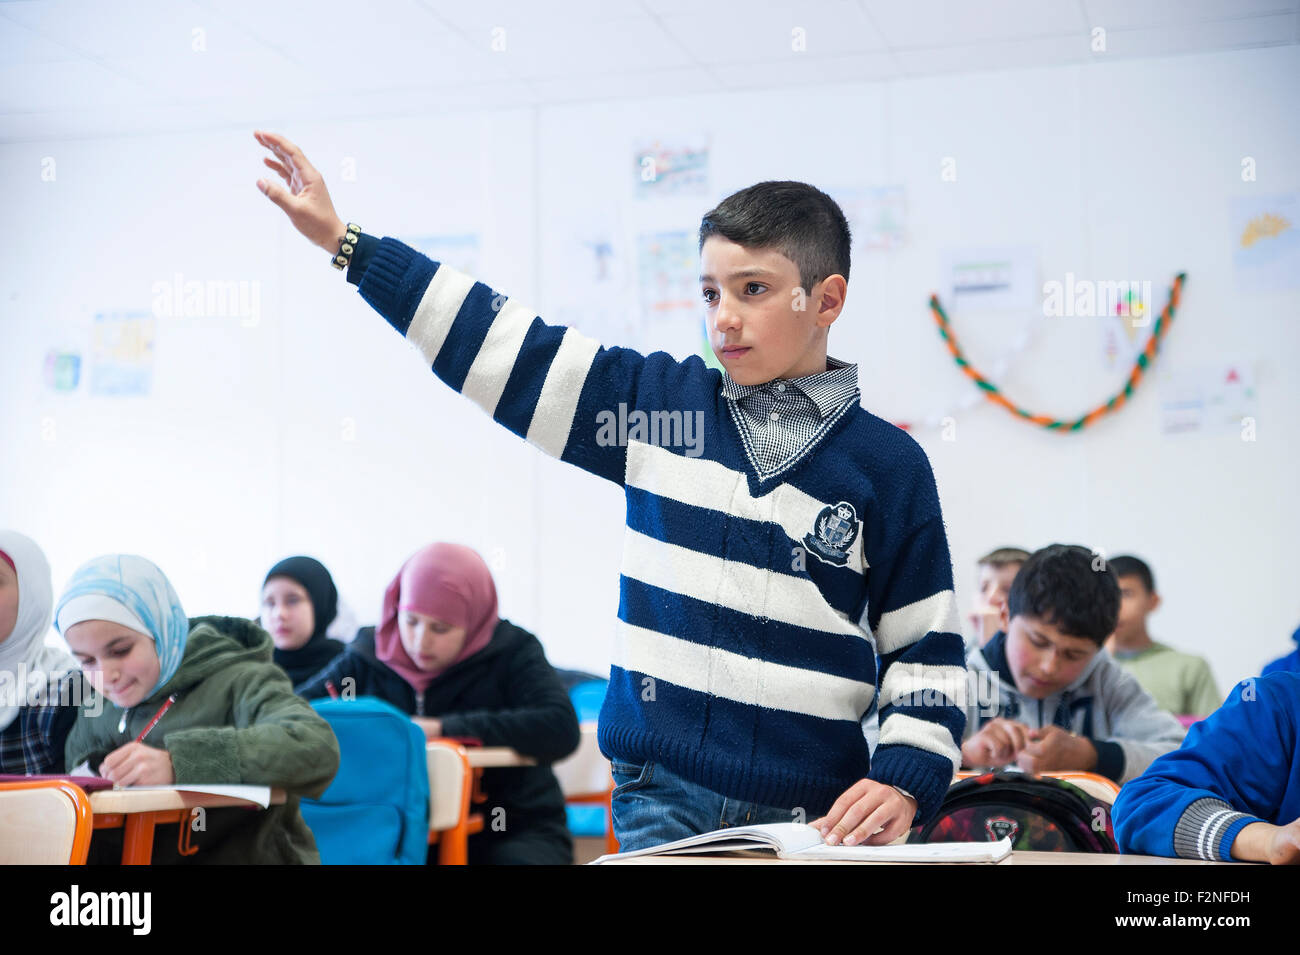 TURKEY, KILIS: A Unicef school caters for more than 1000 Syrian refugee children. They are taught in two shifts. Stock Photo